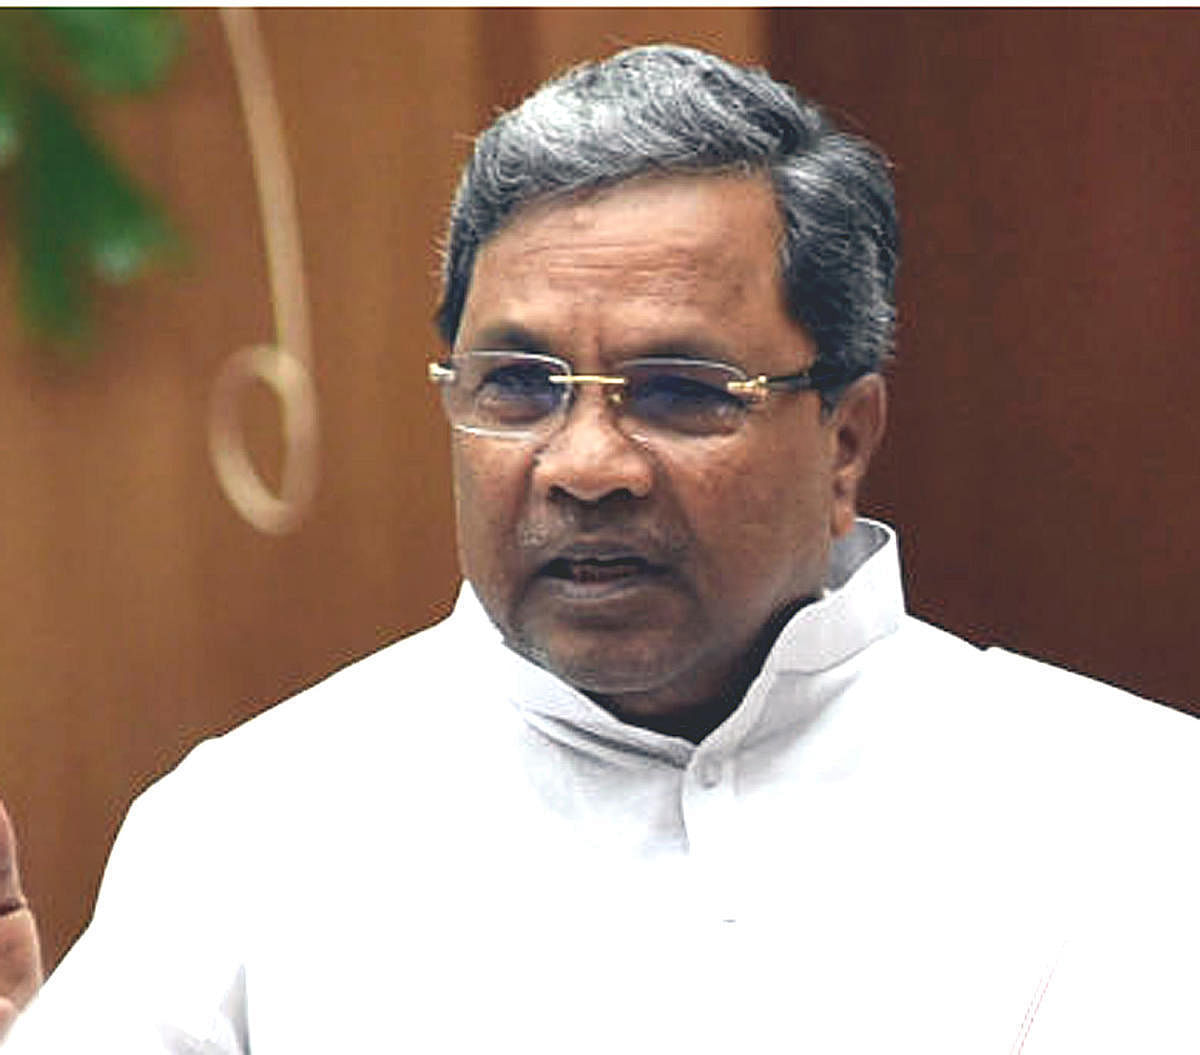 Siddaramaiah had come under criticism after the government collapsed as most of the rebel Congress MLAs, including S T Somashekar, Byrathi Basavaraj, M T B Nagaraj, Munirathna and K Sudhakar, were considered his loyalists.